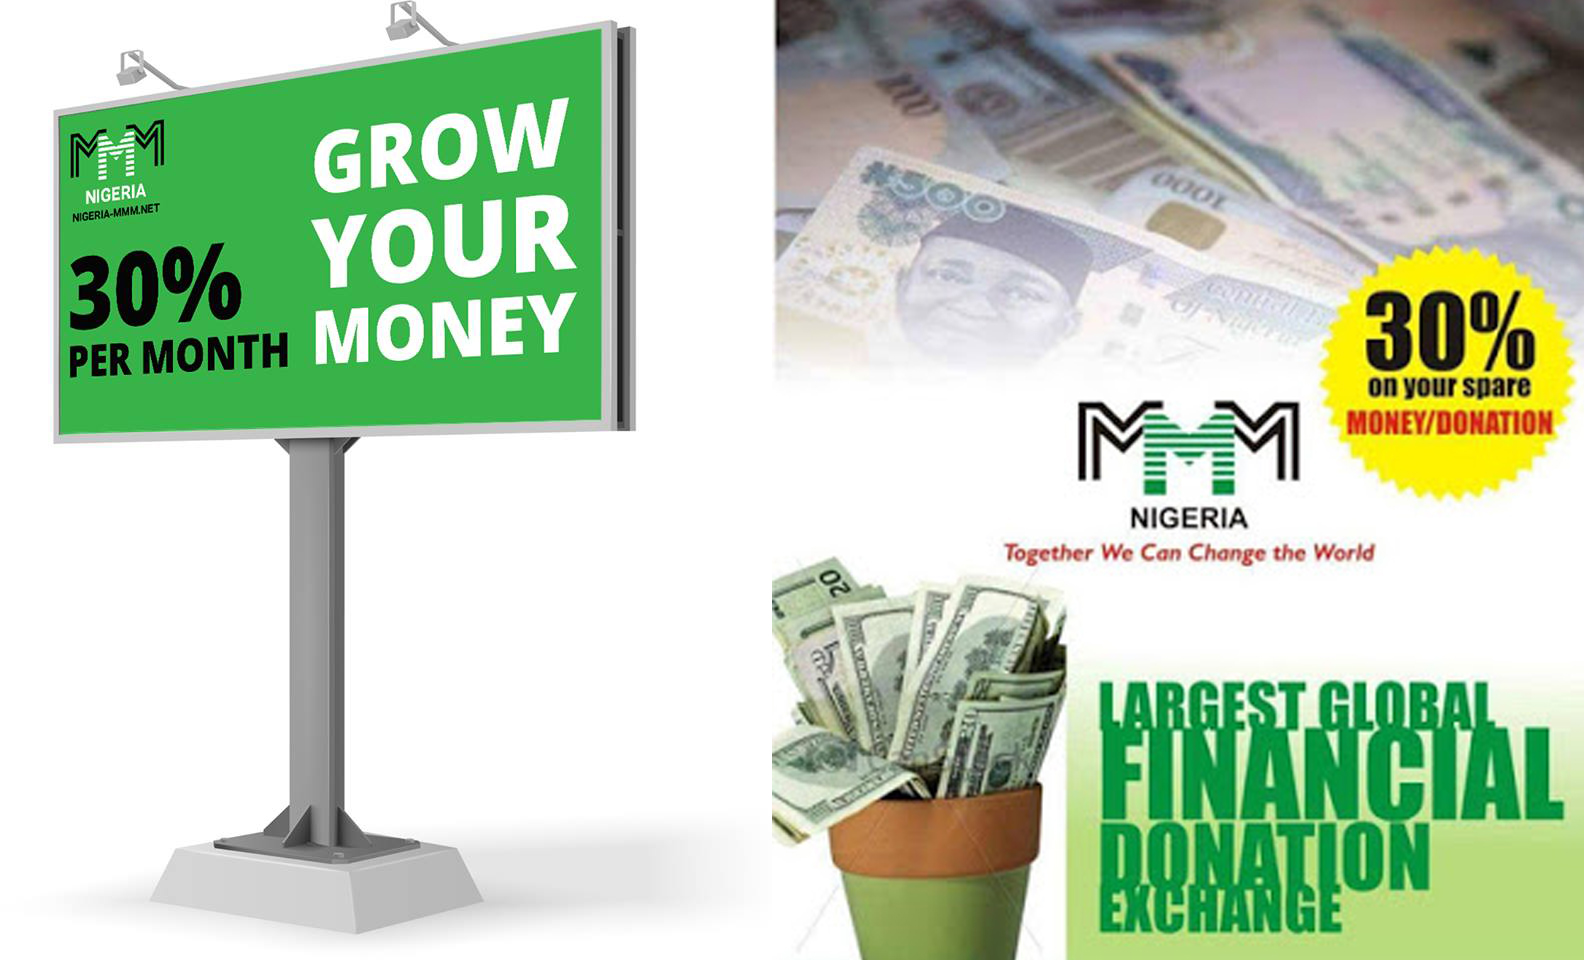 Grow your Spare Money today with MMM